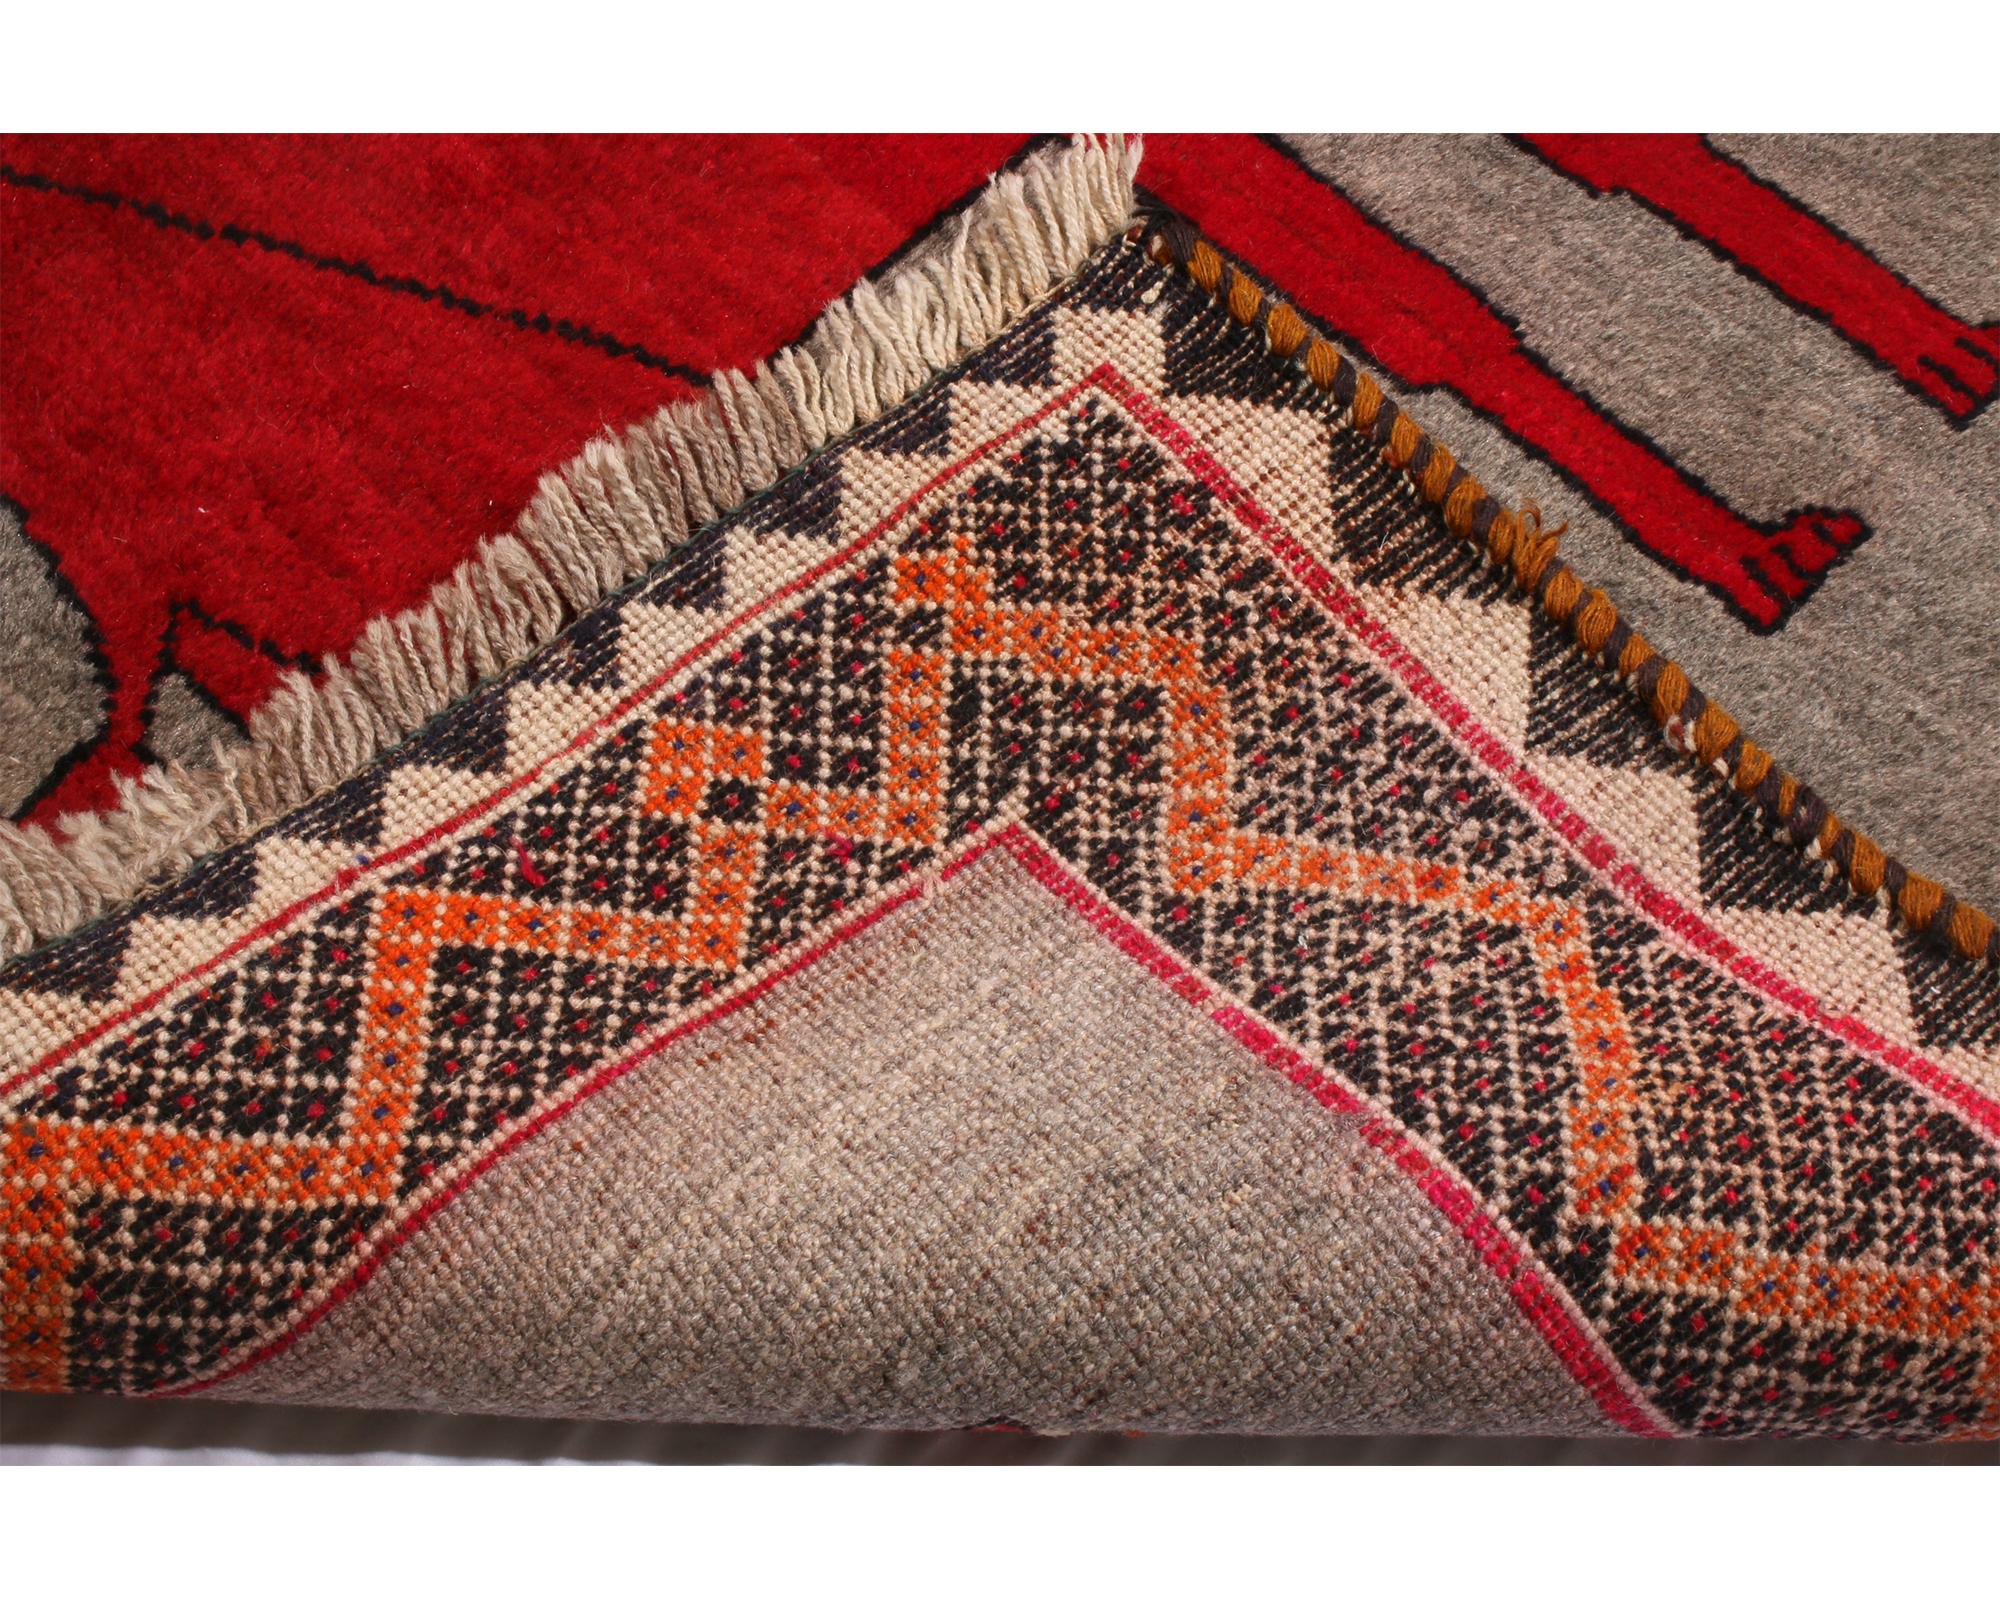 Mid-20th Century Vintage Gabbeh Red and Silver-Gray Wool Persian Rug with Geometric Pictorial Lio